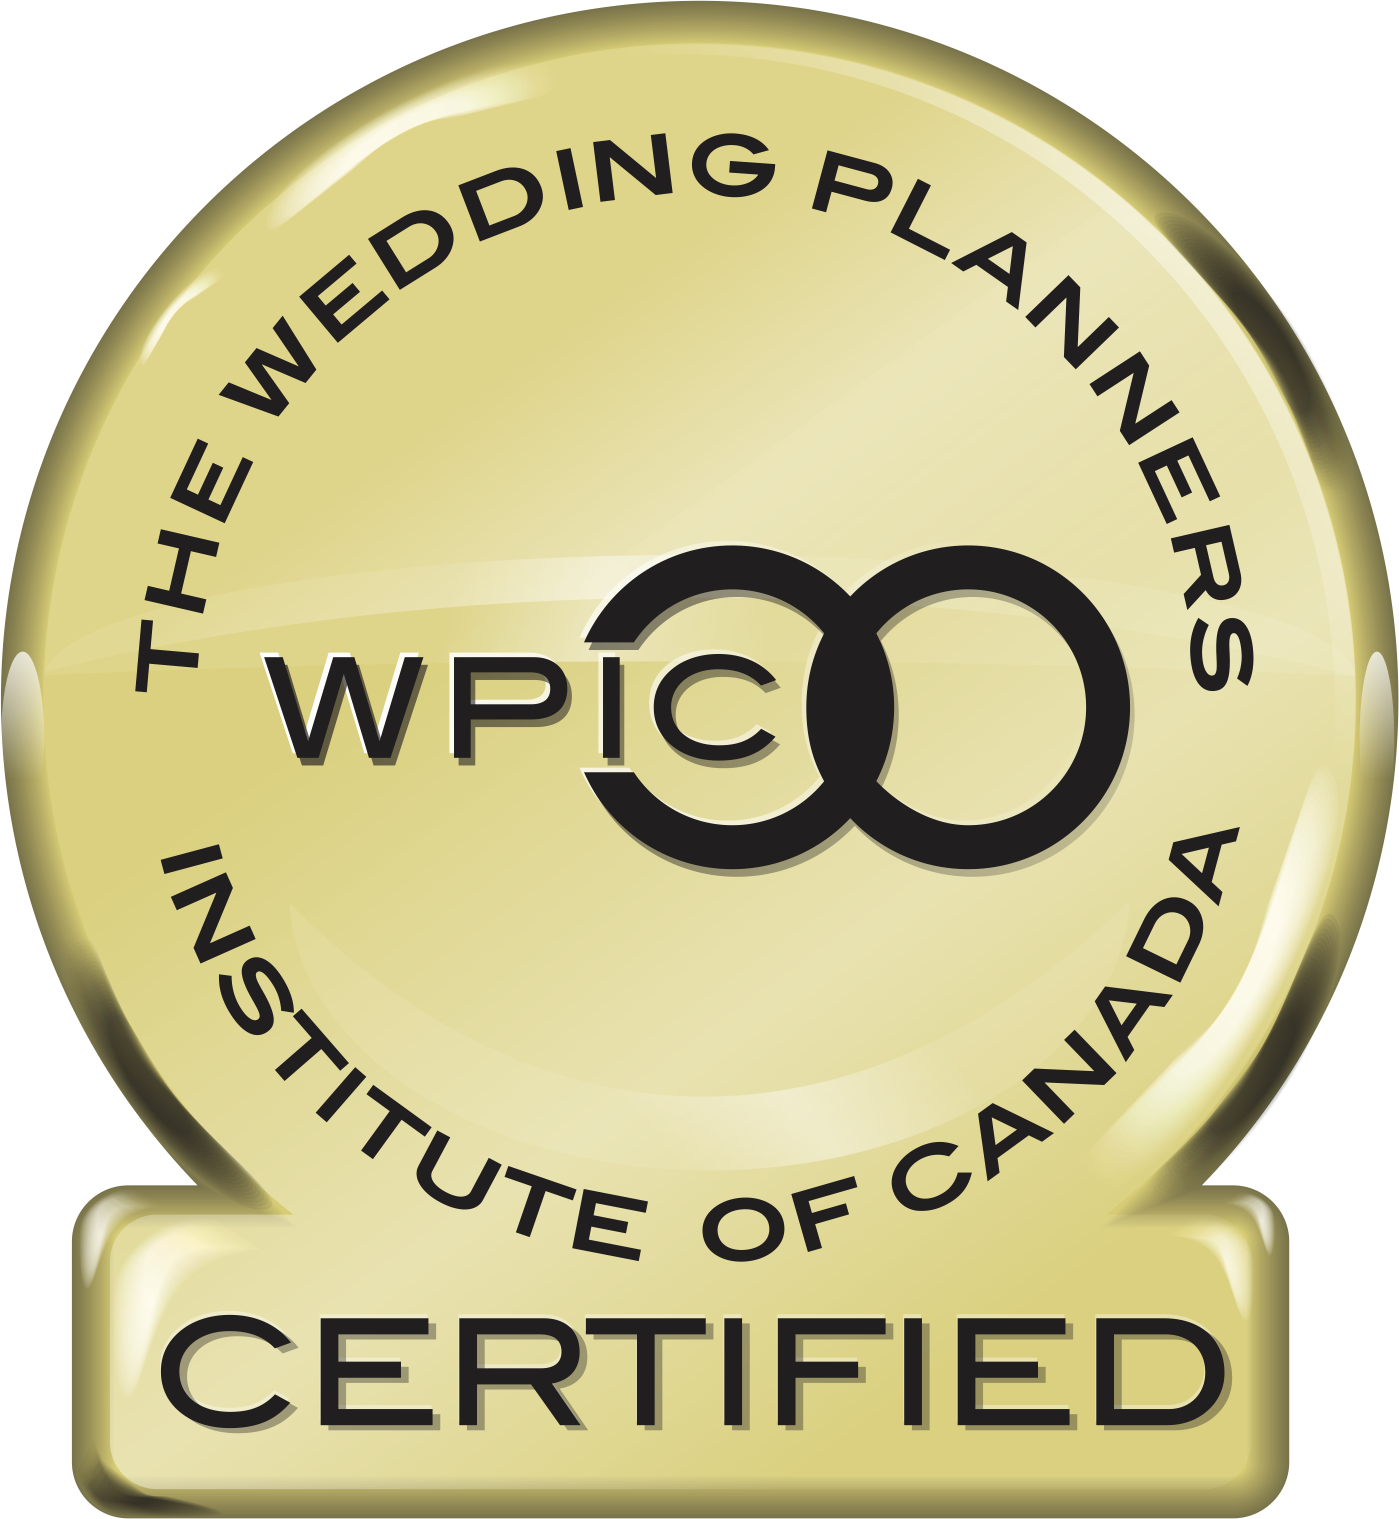 The Wedding Planners Institute of Canada